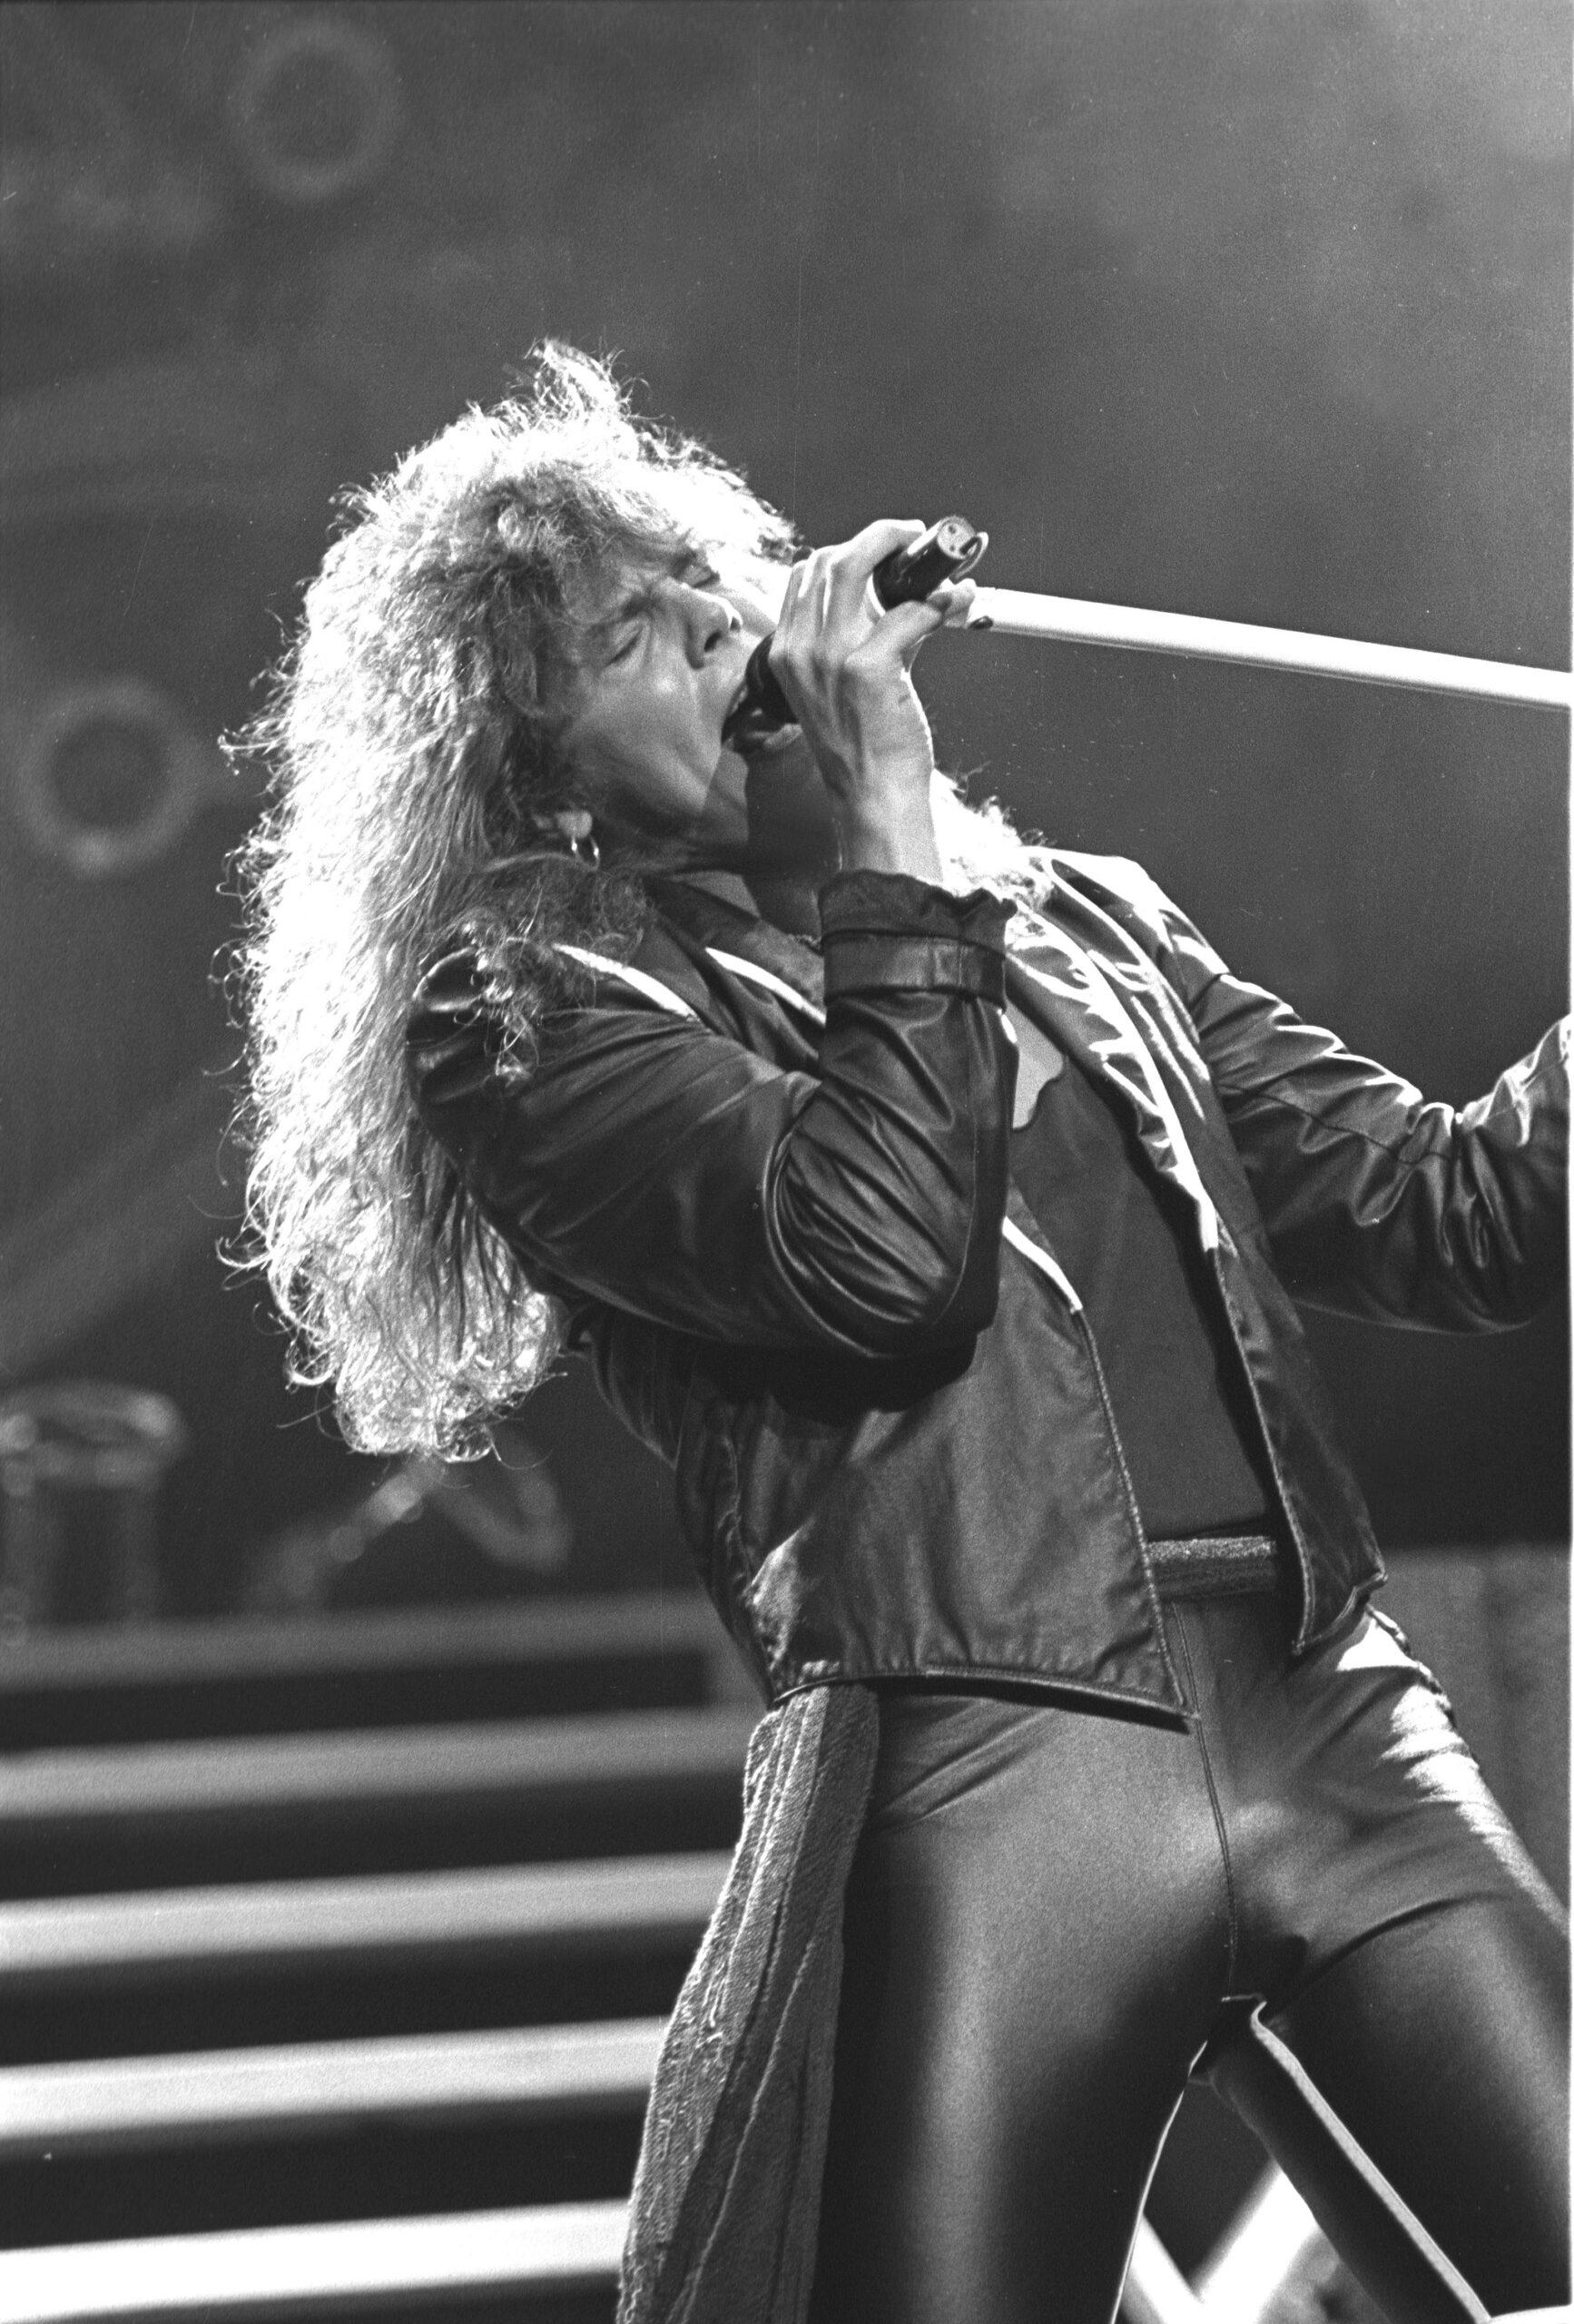 Black-and-white photo of Europe singer Joey Tempest singing on stage, bent backwards with a microphone held up high.